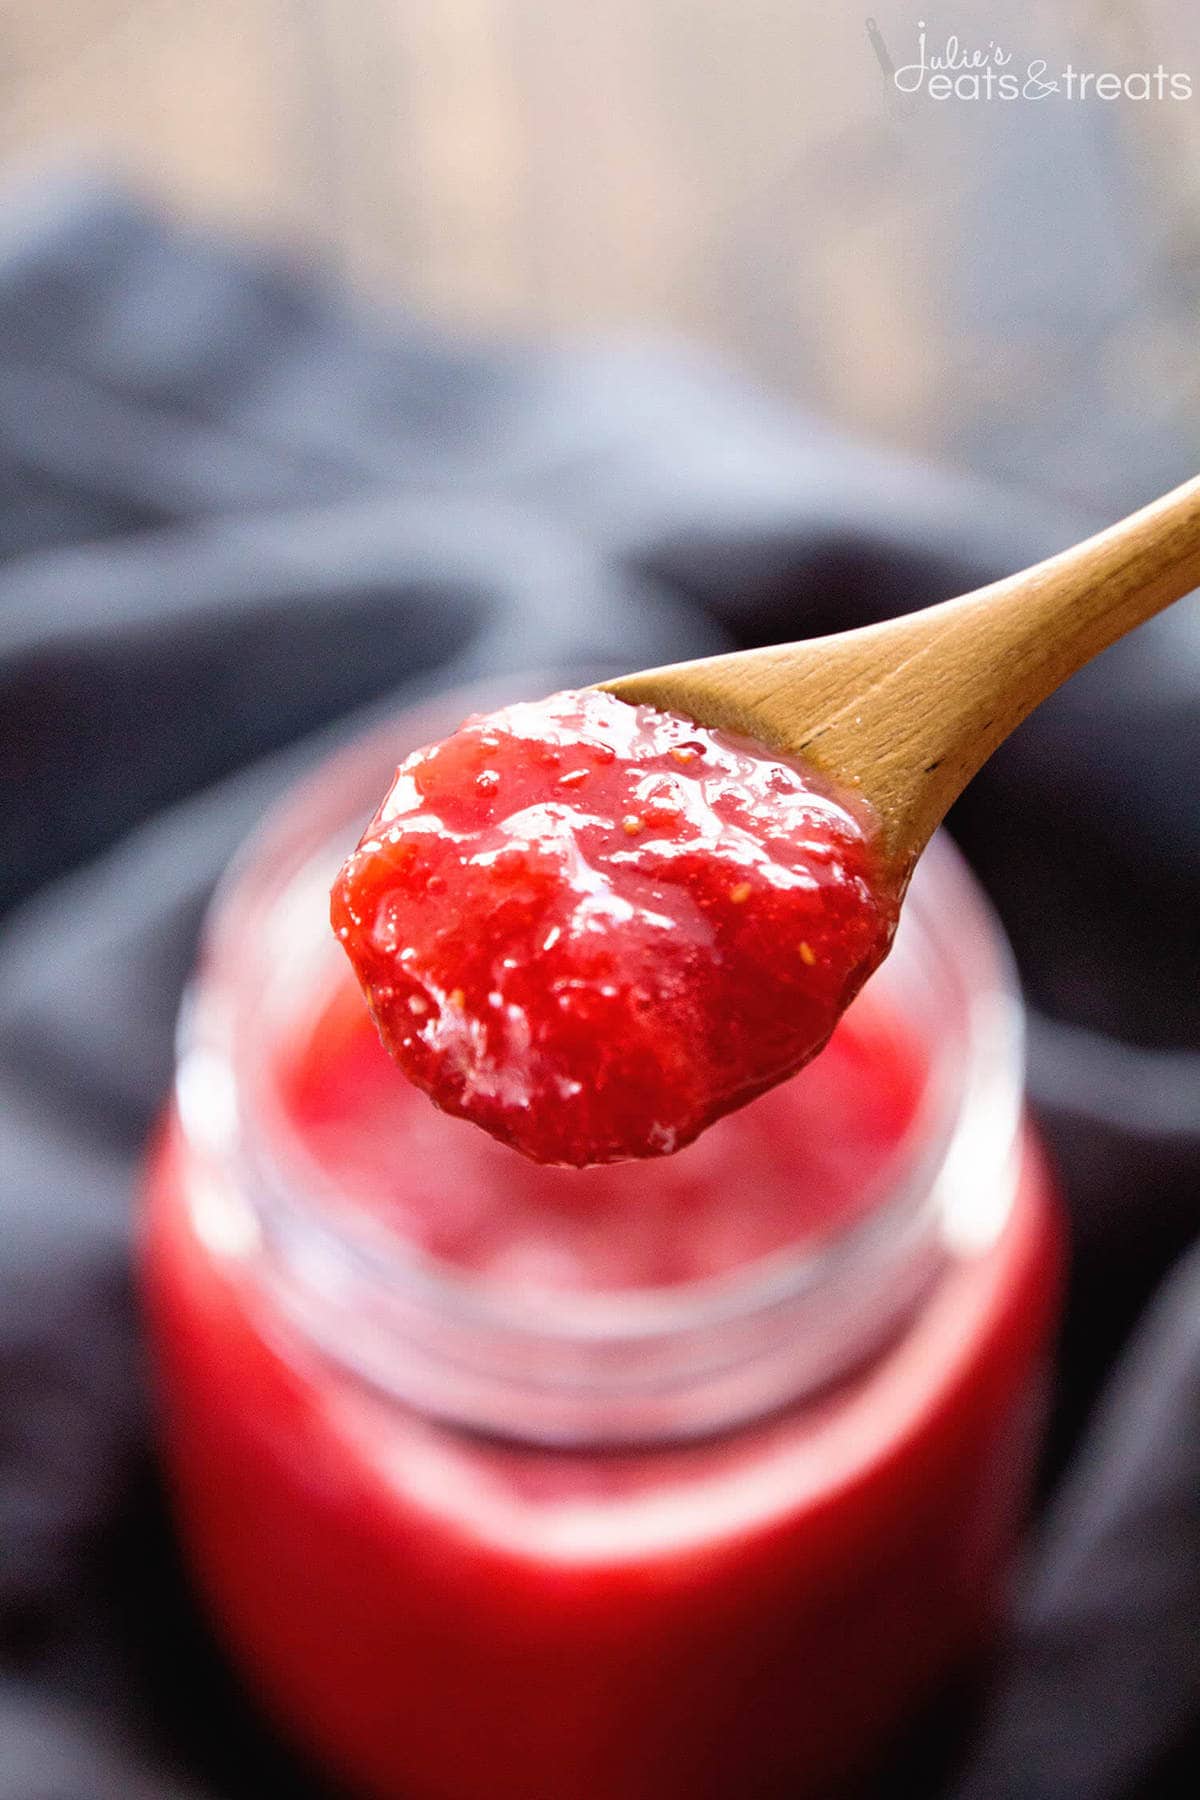 3 Easy Ingredient Strawberry Rhubarb Jam Recipe ~ This Strawberry Rhubarb Jam is so Quick and Delicious that Anyone Can Make It! Plus it's Lightened Up!